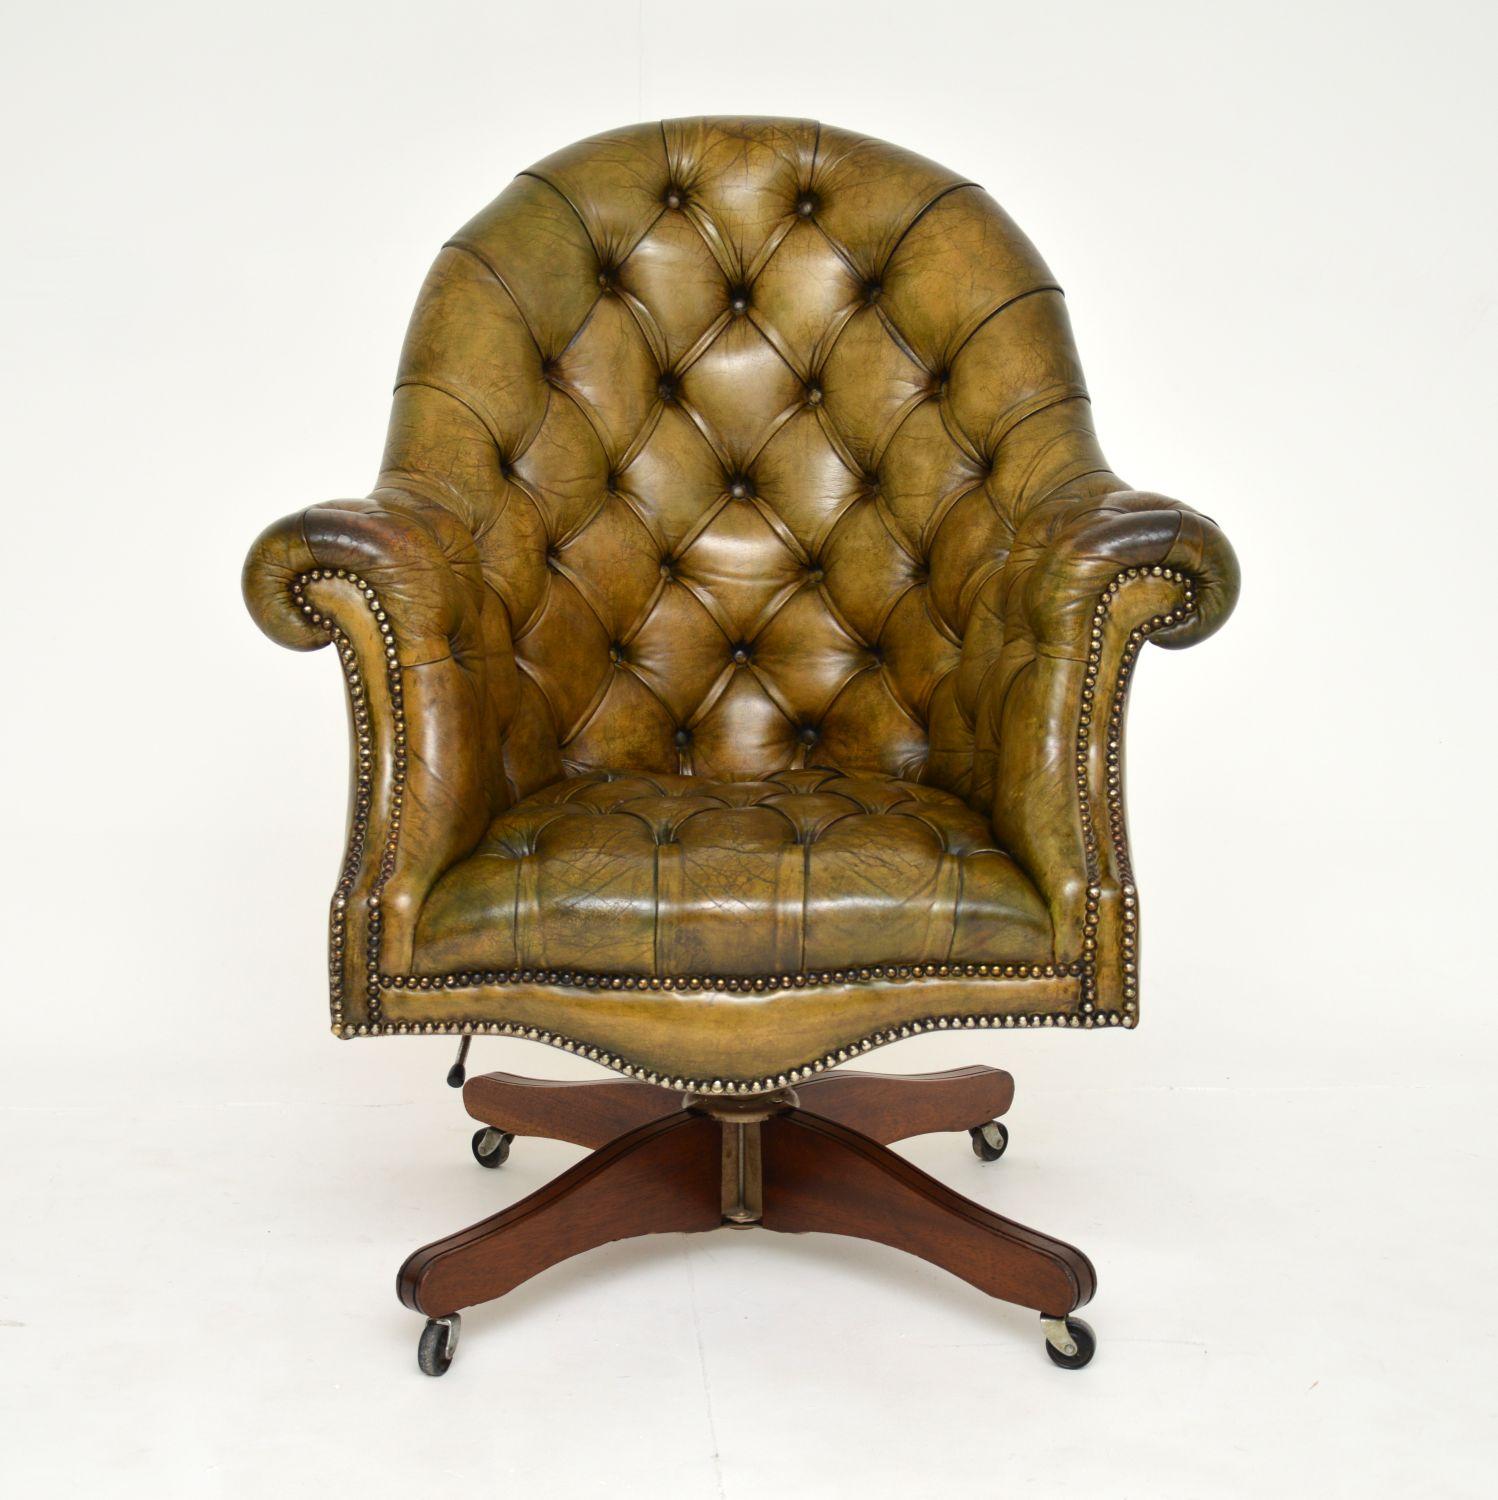 A stunning and extremely comfortable antique deep buttoned leather directors desk chair. This was made in England, it dates from around the 1950’s.

It is of superb quality and has very generous proportions. The leather has a gorgeous colour tone